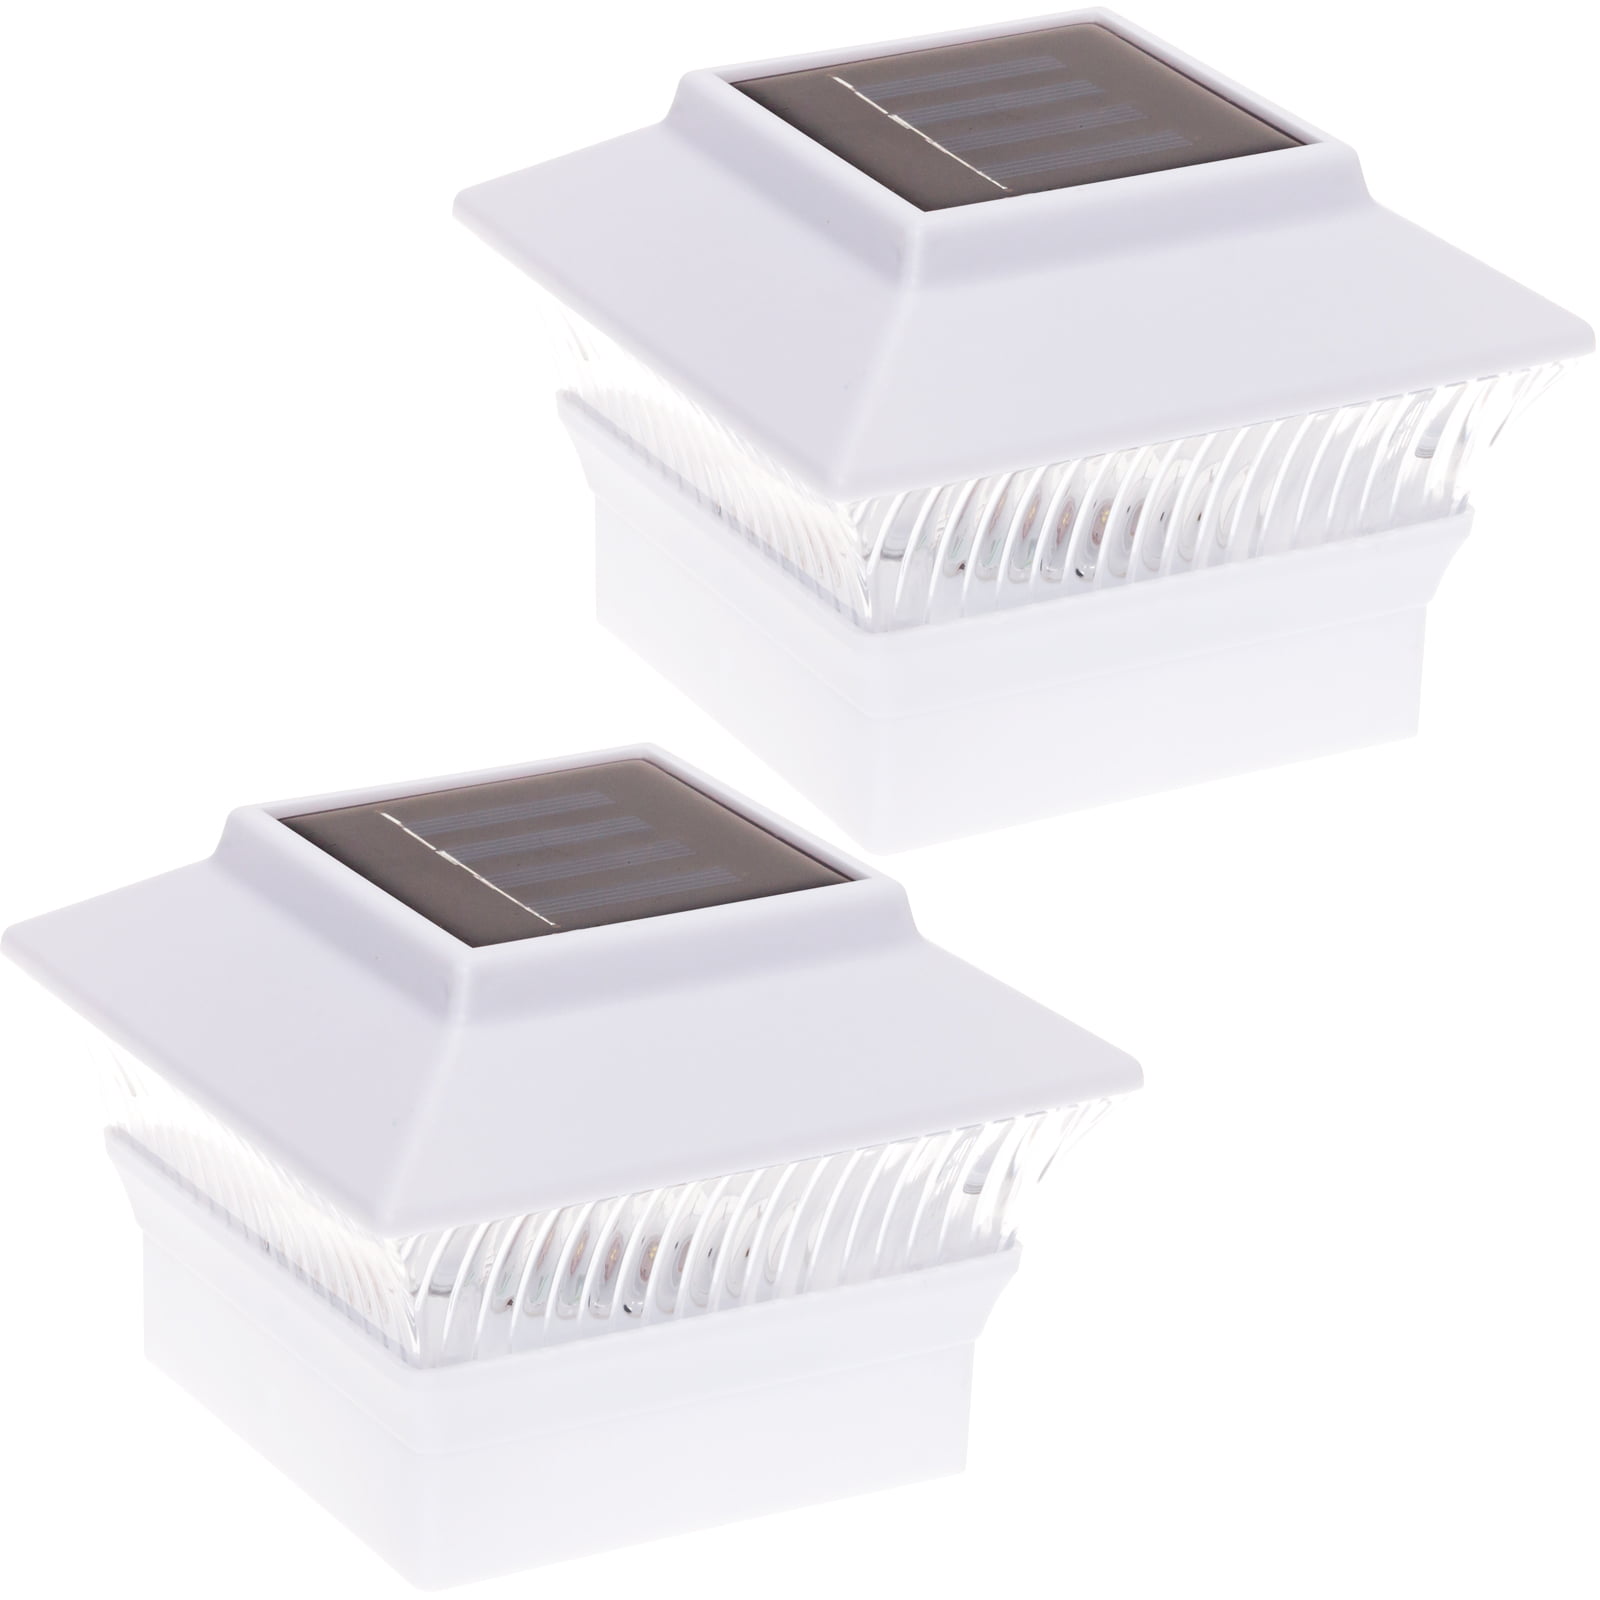 Wood Post 8-pk Solar 4x4 Copper Cap Light With 4 Bright White SMD LED For PVC